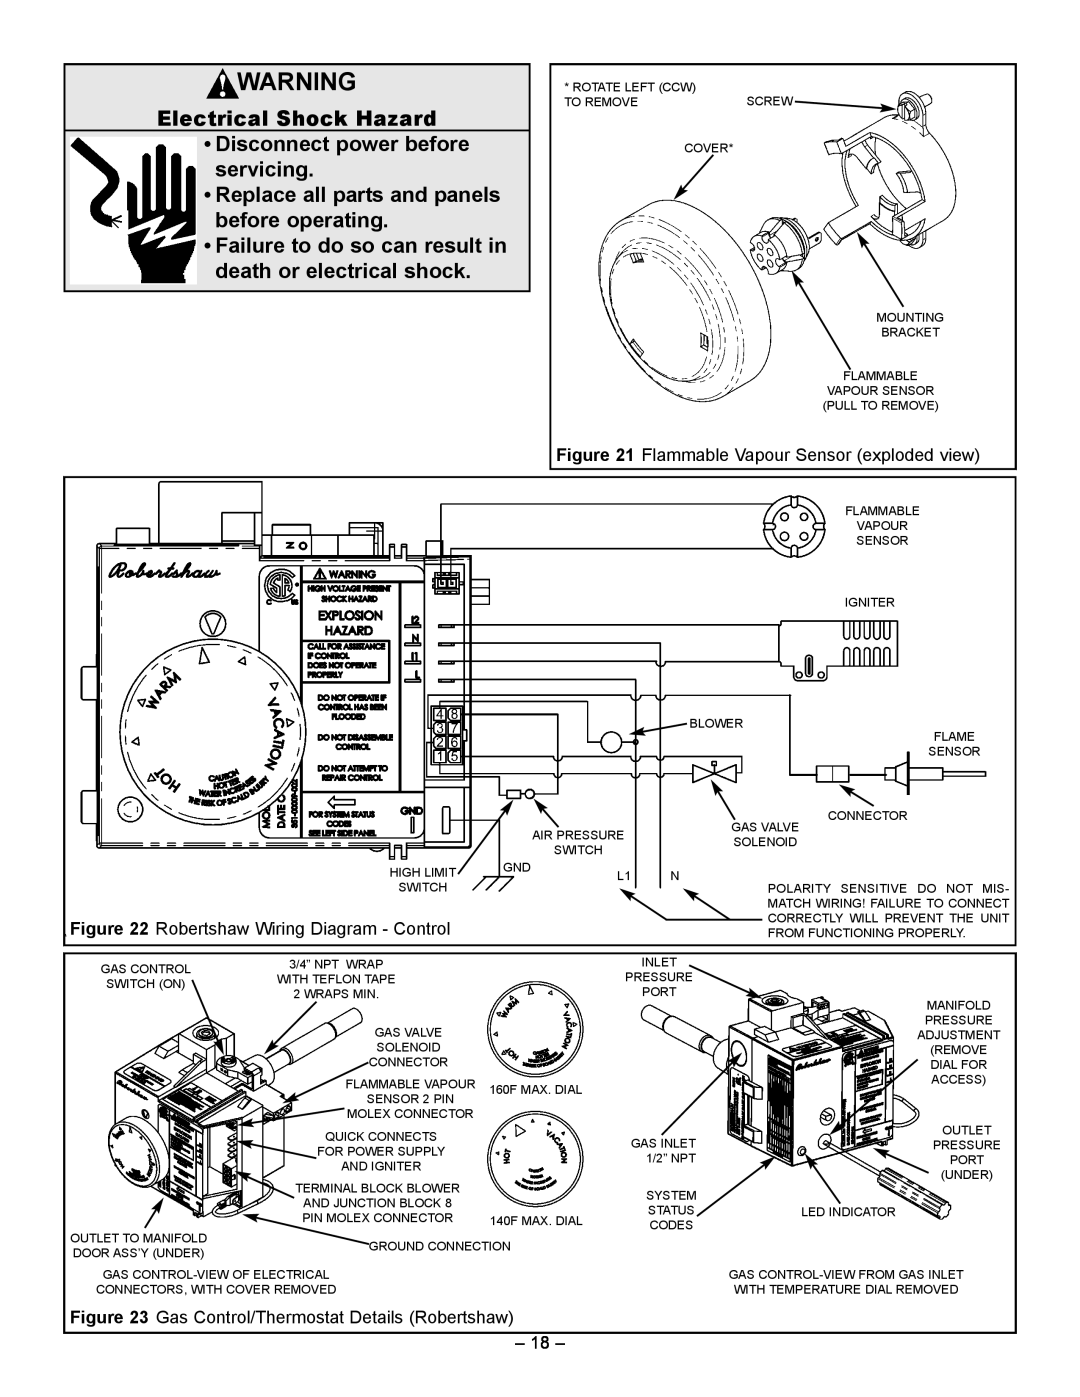 GSW 5065 manual Electrical Shock Hazard, Disconnect power before servicing, Replace all parts and panels before operating 